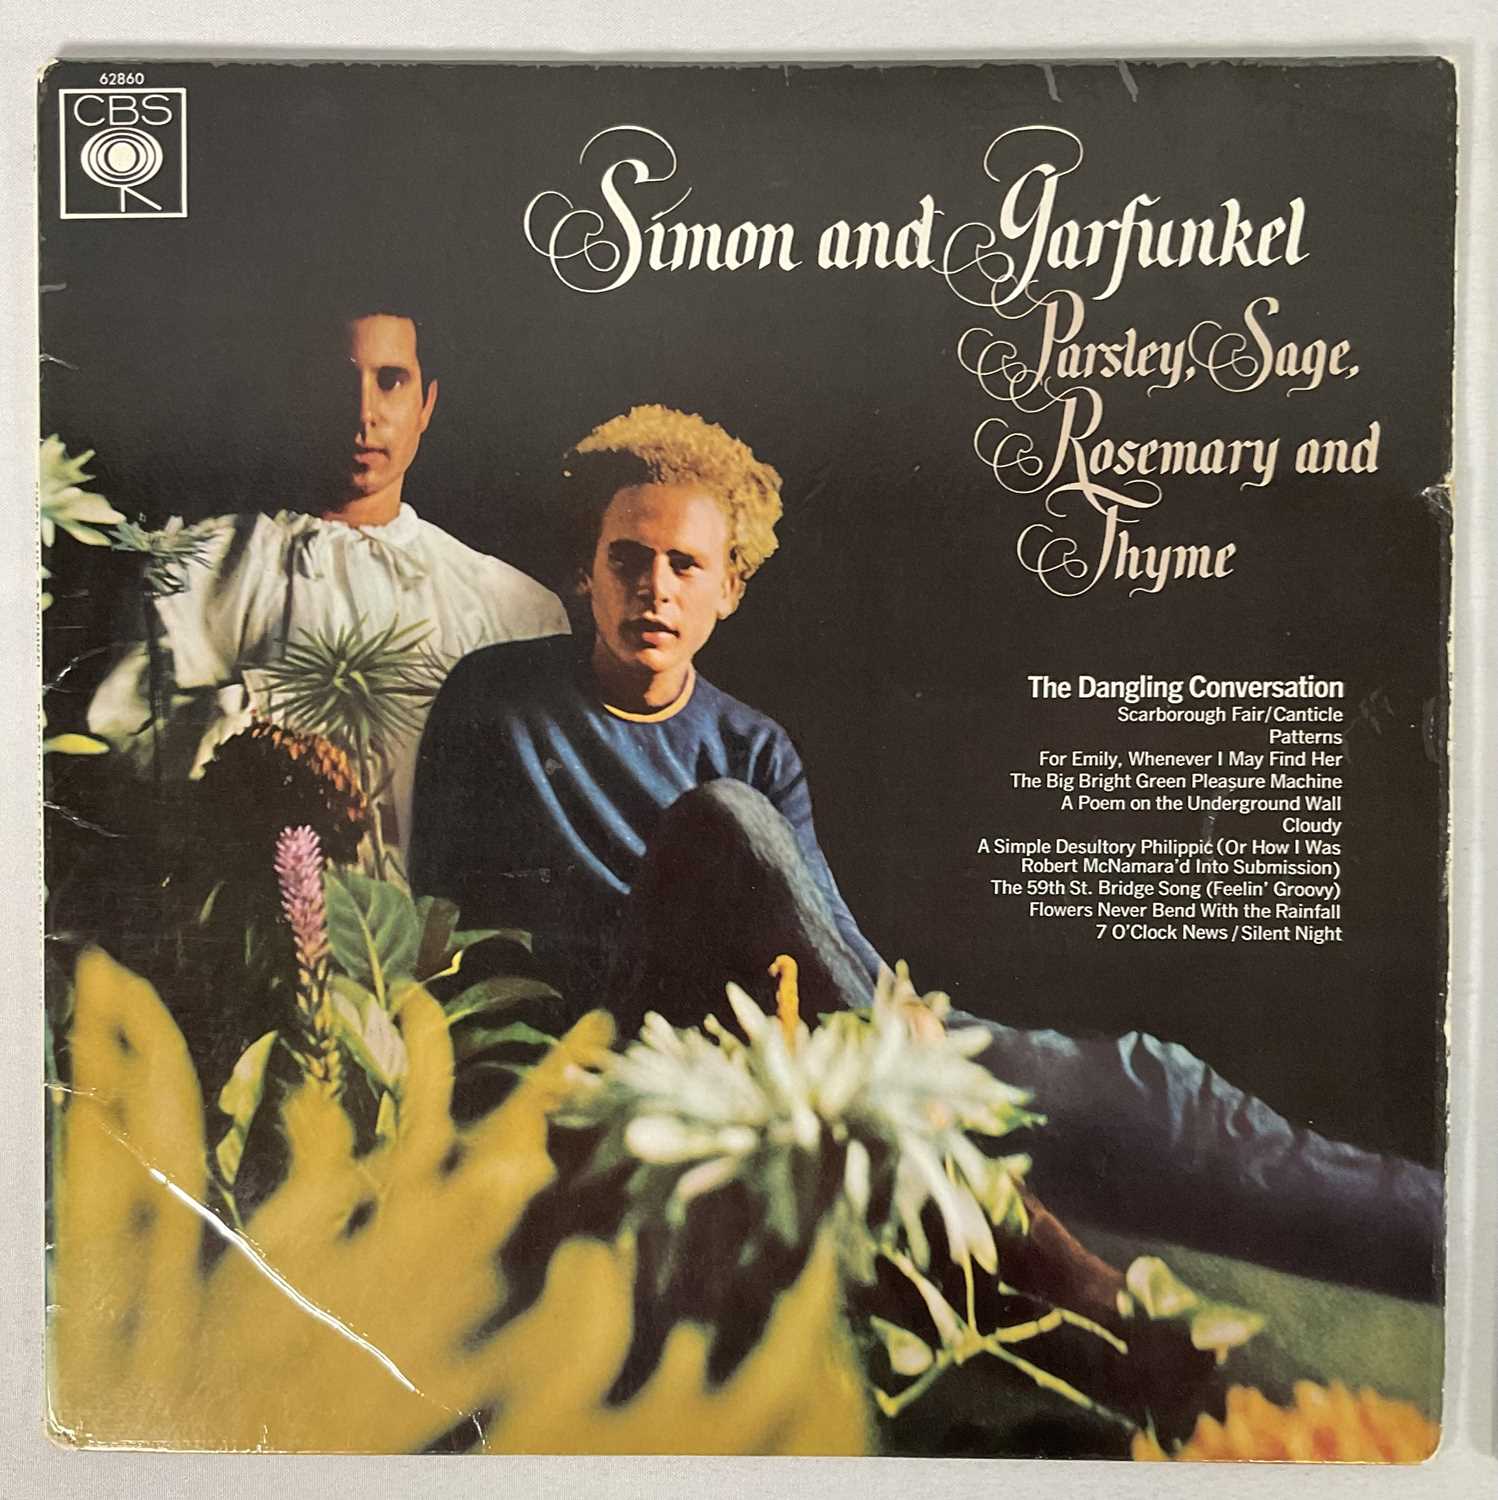 SIMON AND GARFUNKEL - A copy of Parsley, Sage, Rosemary and Thyme (1966) Vinyl LP signed in blue pen - Image 2 of 3